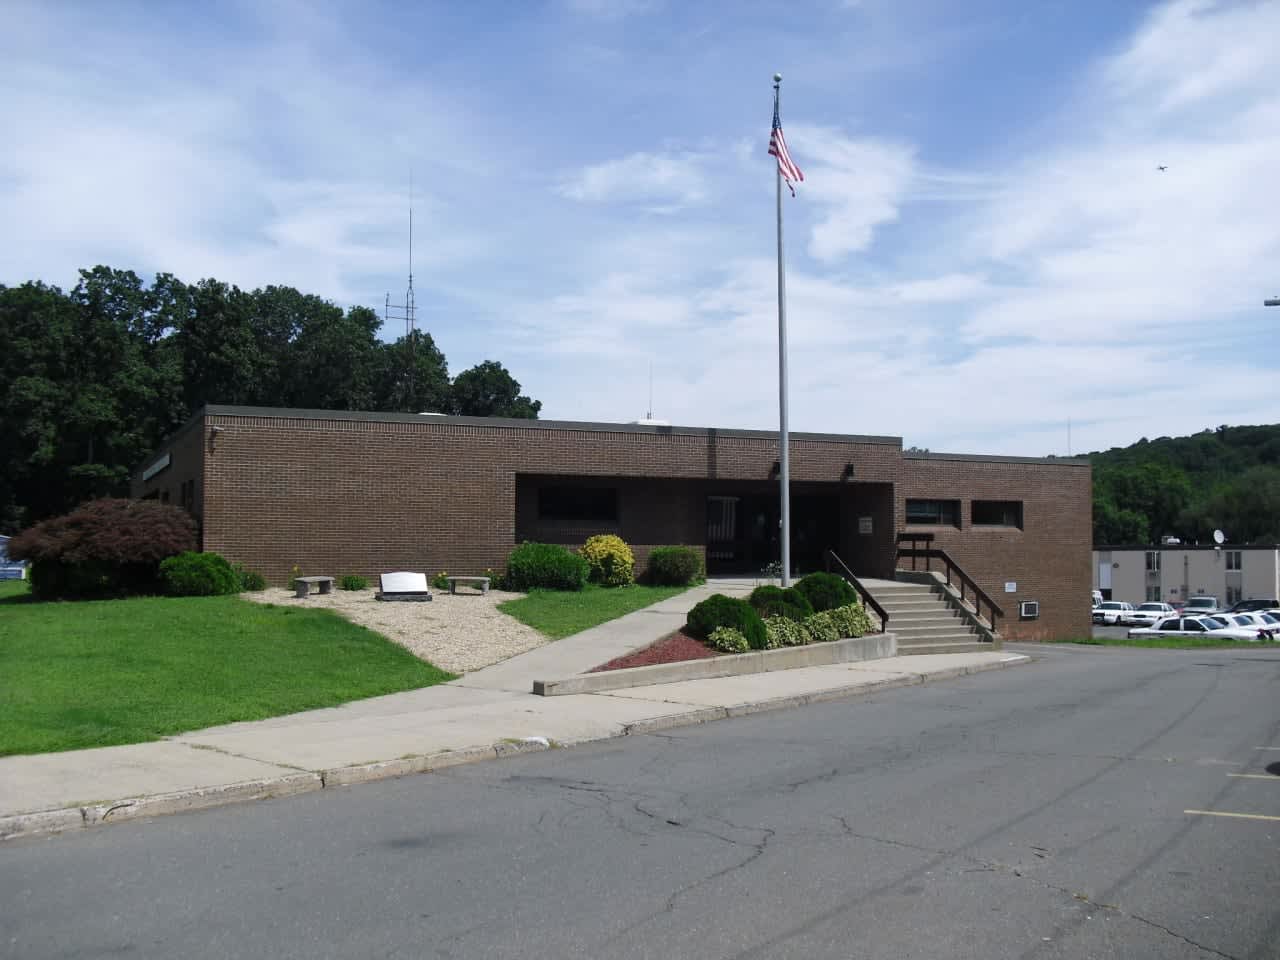 An officer with the East Haven Police Department has been placed on leave after videos of him allegedly surfaced on a pornographic website online.